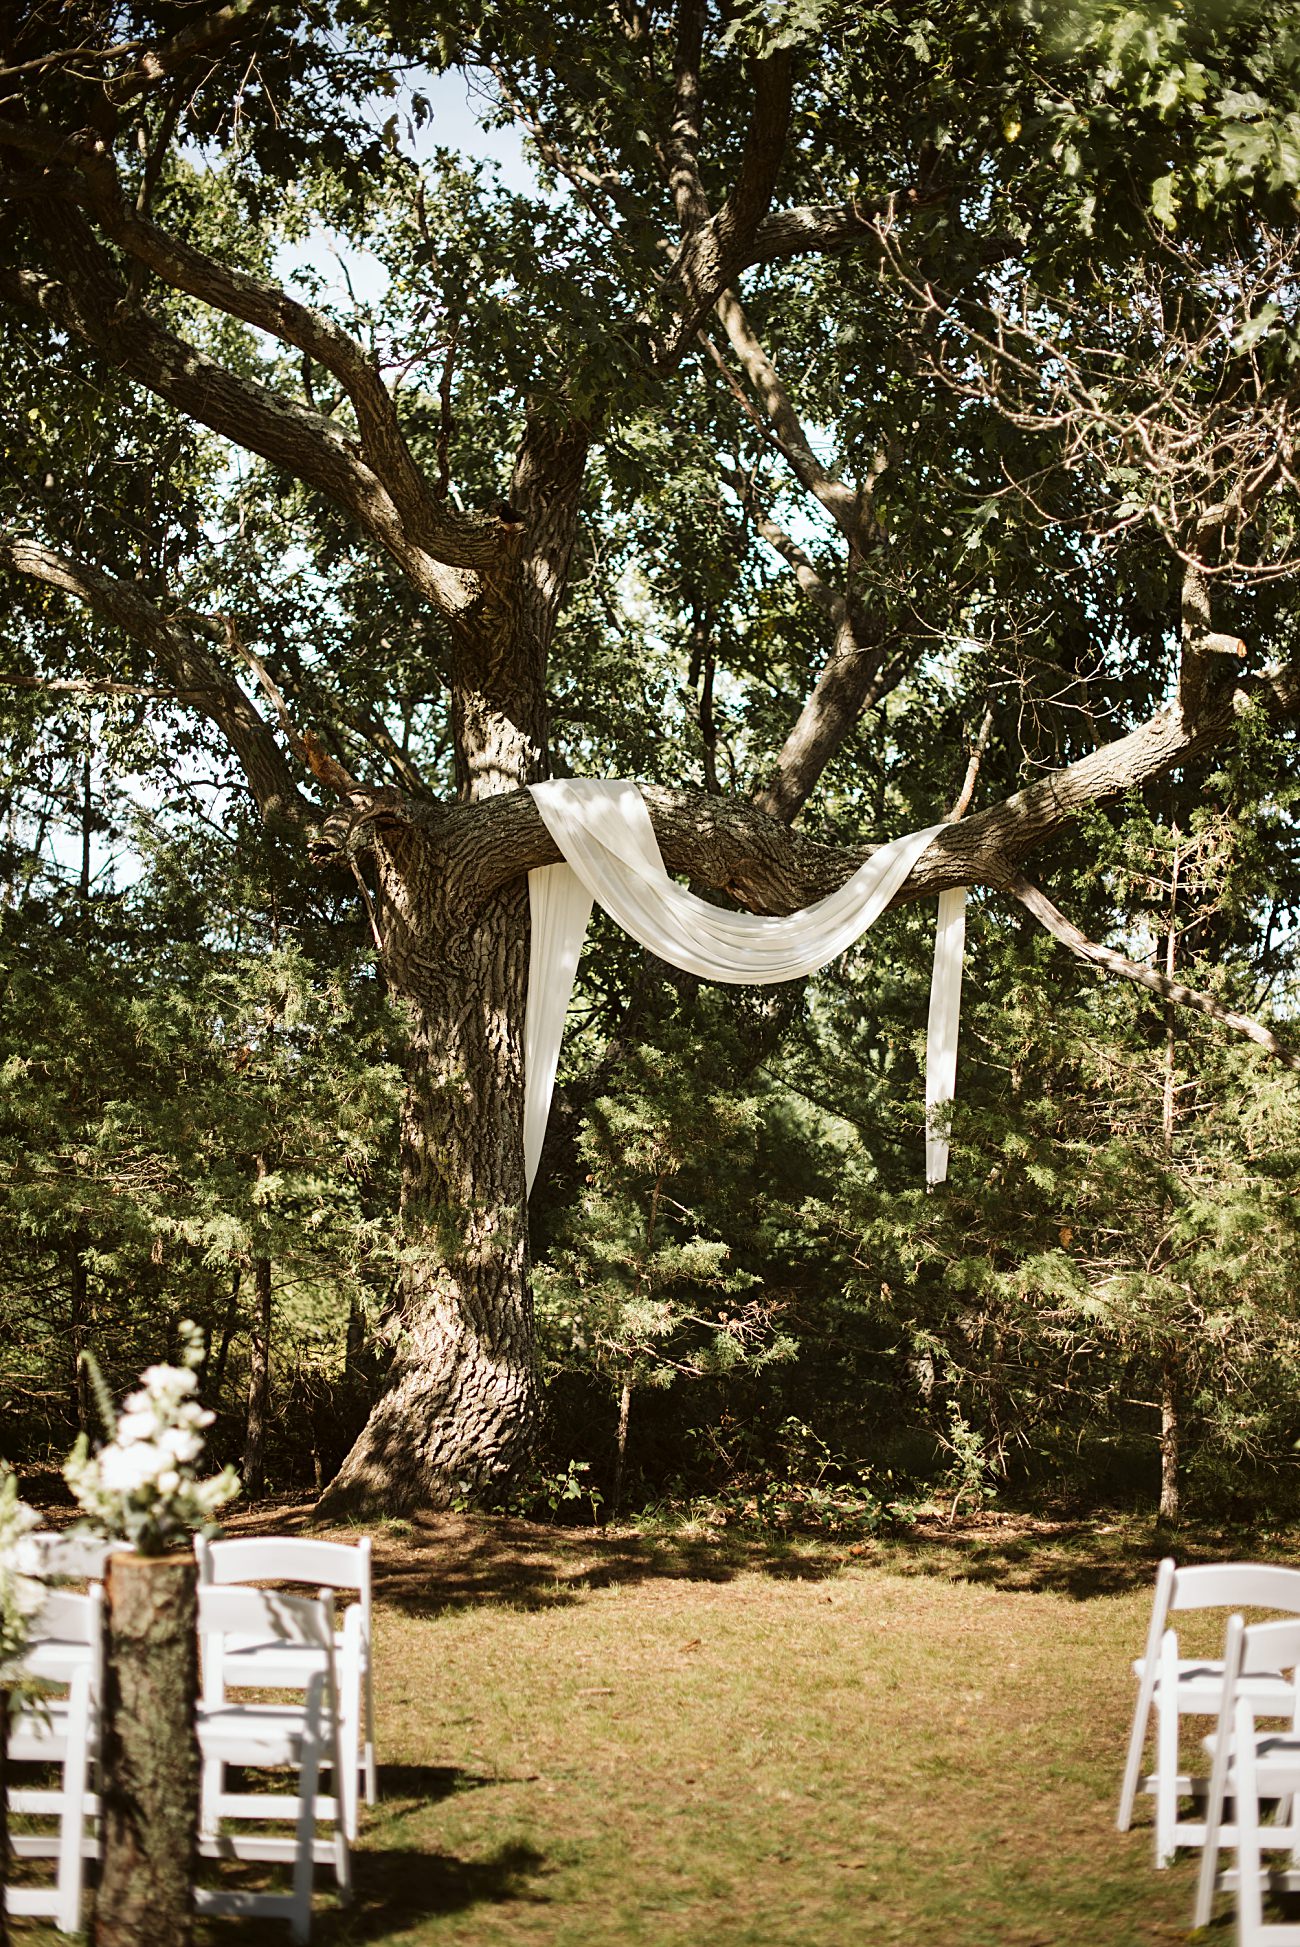 Outdoor Ceremony Ideas, outdoor wedding decoration ideas on a budget